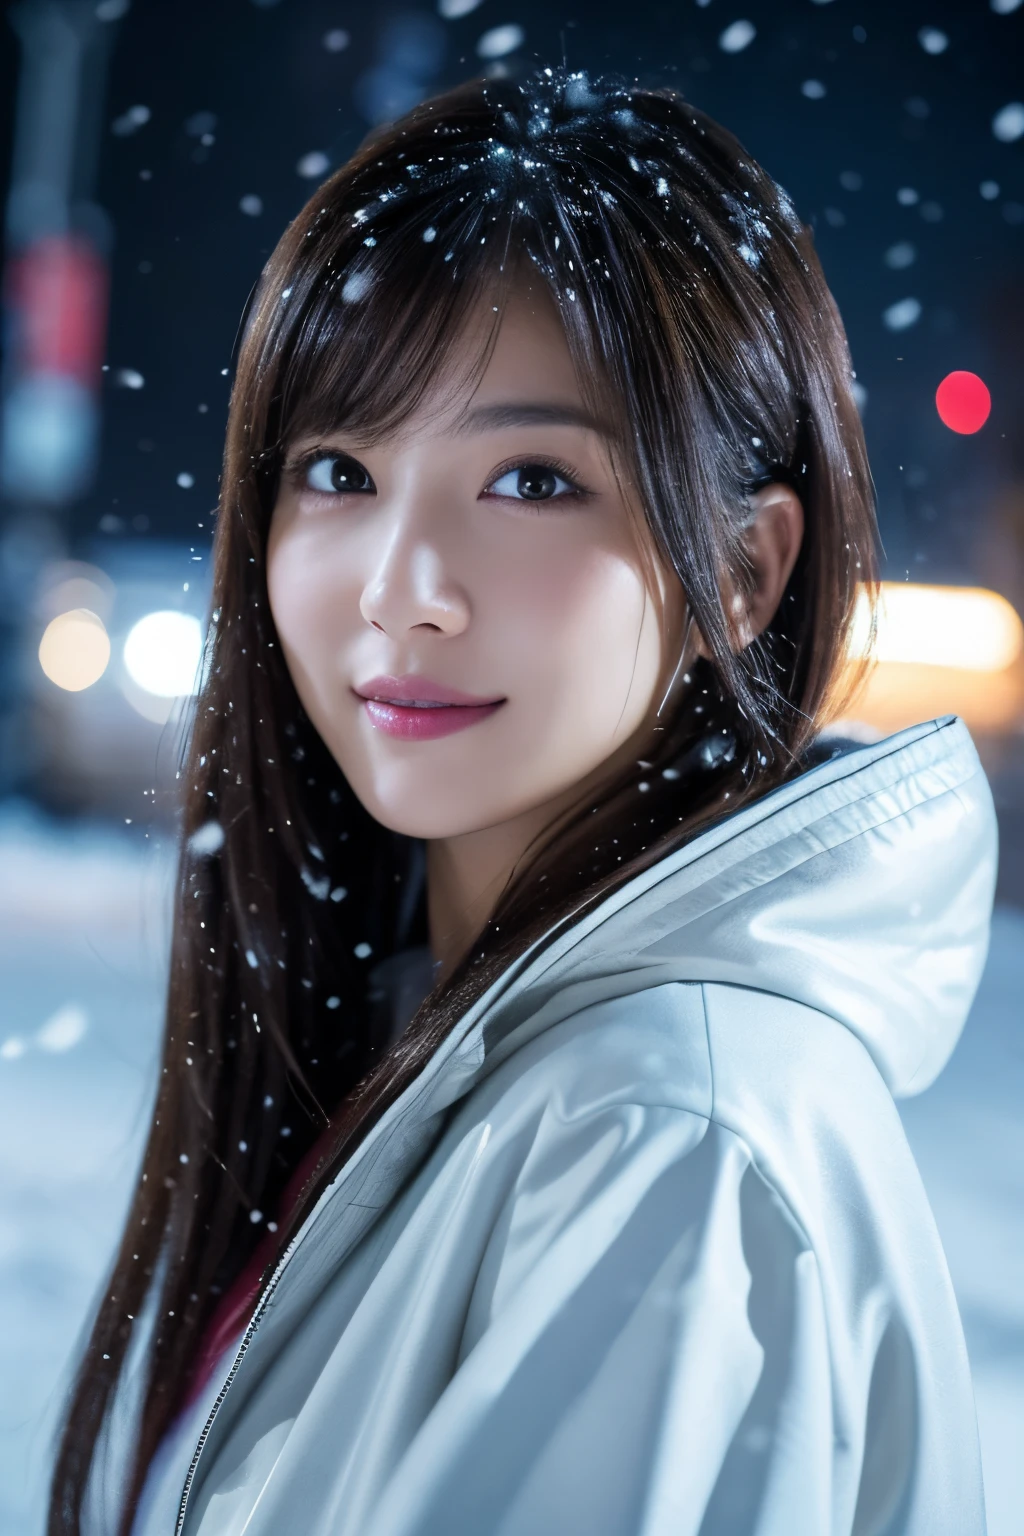 1girl in, (wear a platinum coat:1.2), (Raw photo, Best Quality), (Realistic, Photorealsitic:1.4), masutepiece, Extremely delicate and beautiful, Extremely detailed, 2k wallpaper, amazing, finely detail, the Extremely Detailed CG Unity 8K Wallpapers, Ultra-detailed, hight resolution, Soft light, Beautiful detailed girl, extremely detailed eye and face, beautiful detailed nose, Beautiful detailed eyes, Cinematic lighting, Illuminations coloring the city on a snowy night, Snowy landscape, It's snowing, Snow piled up in my hair, Perfect Anatomy, Slender body, Taut, 
Straight semi-long hair, Bangs, Looking at Viewer, A slight smil